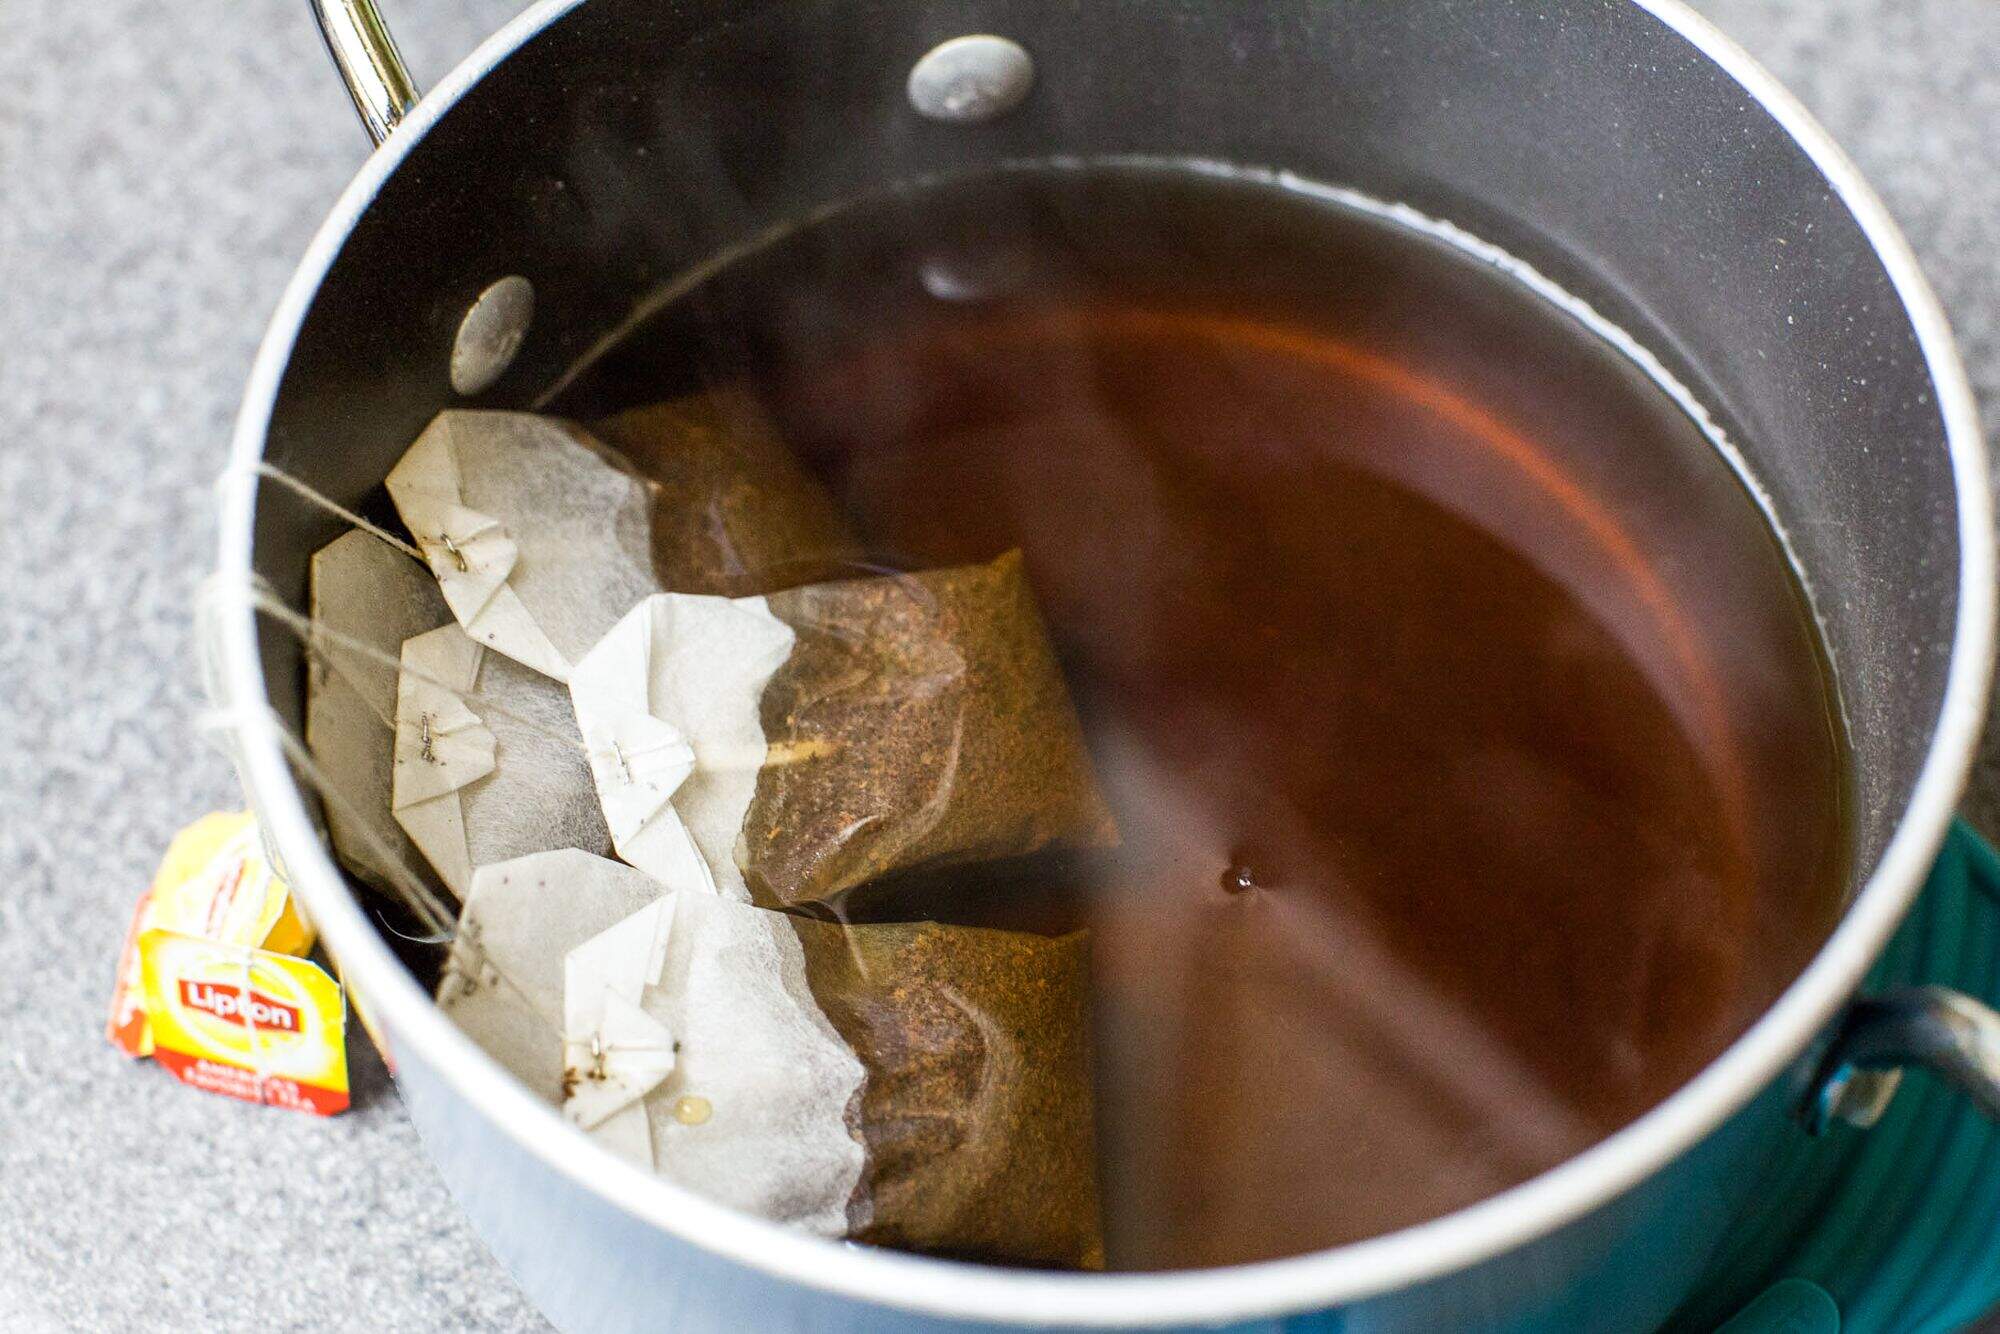 Yes, You Can Boil Water at Room Temperature. Here's How